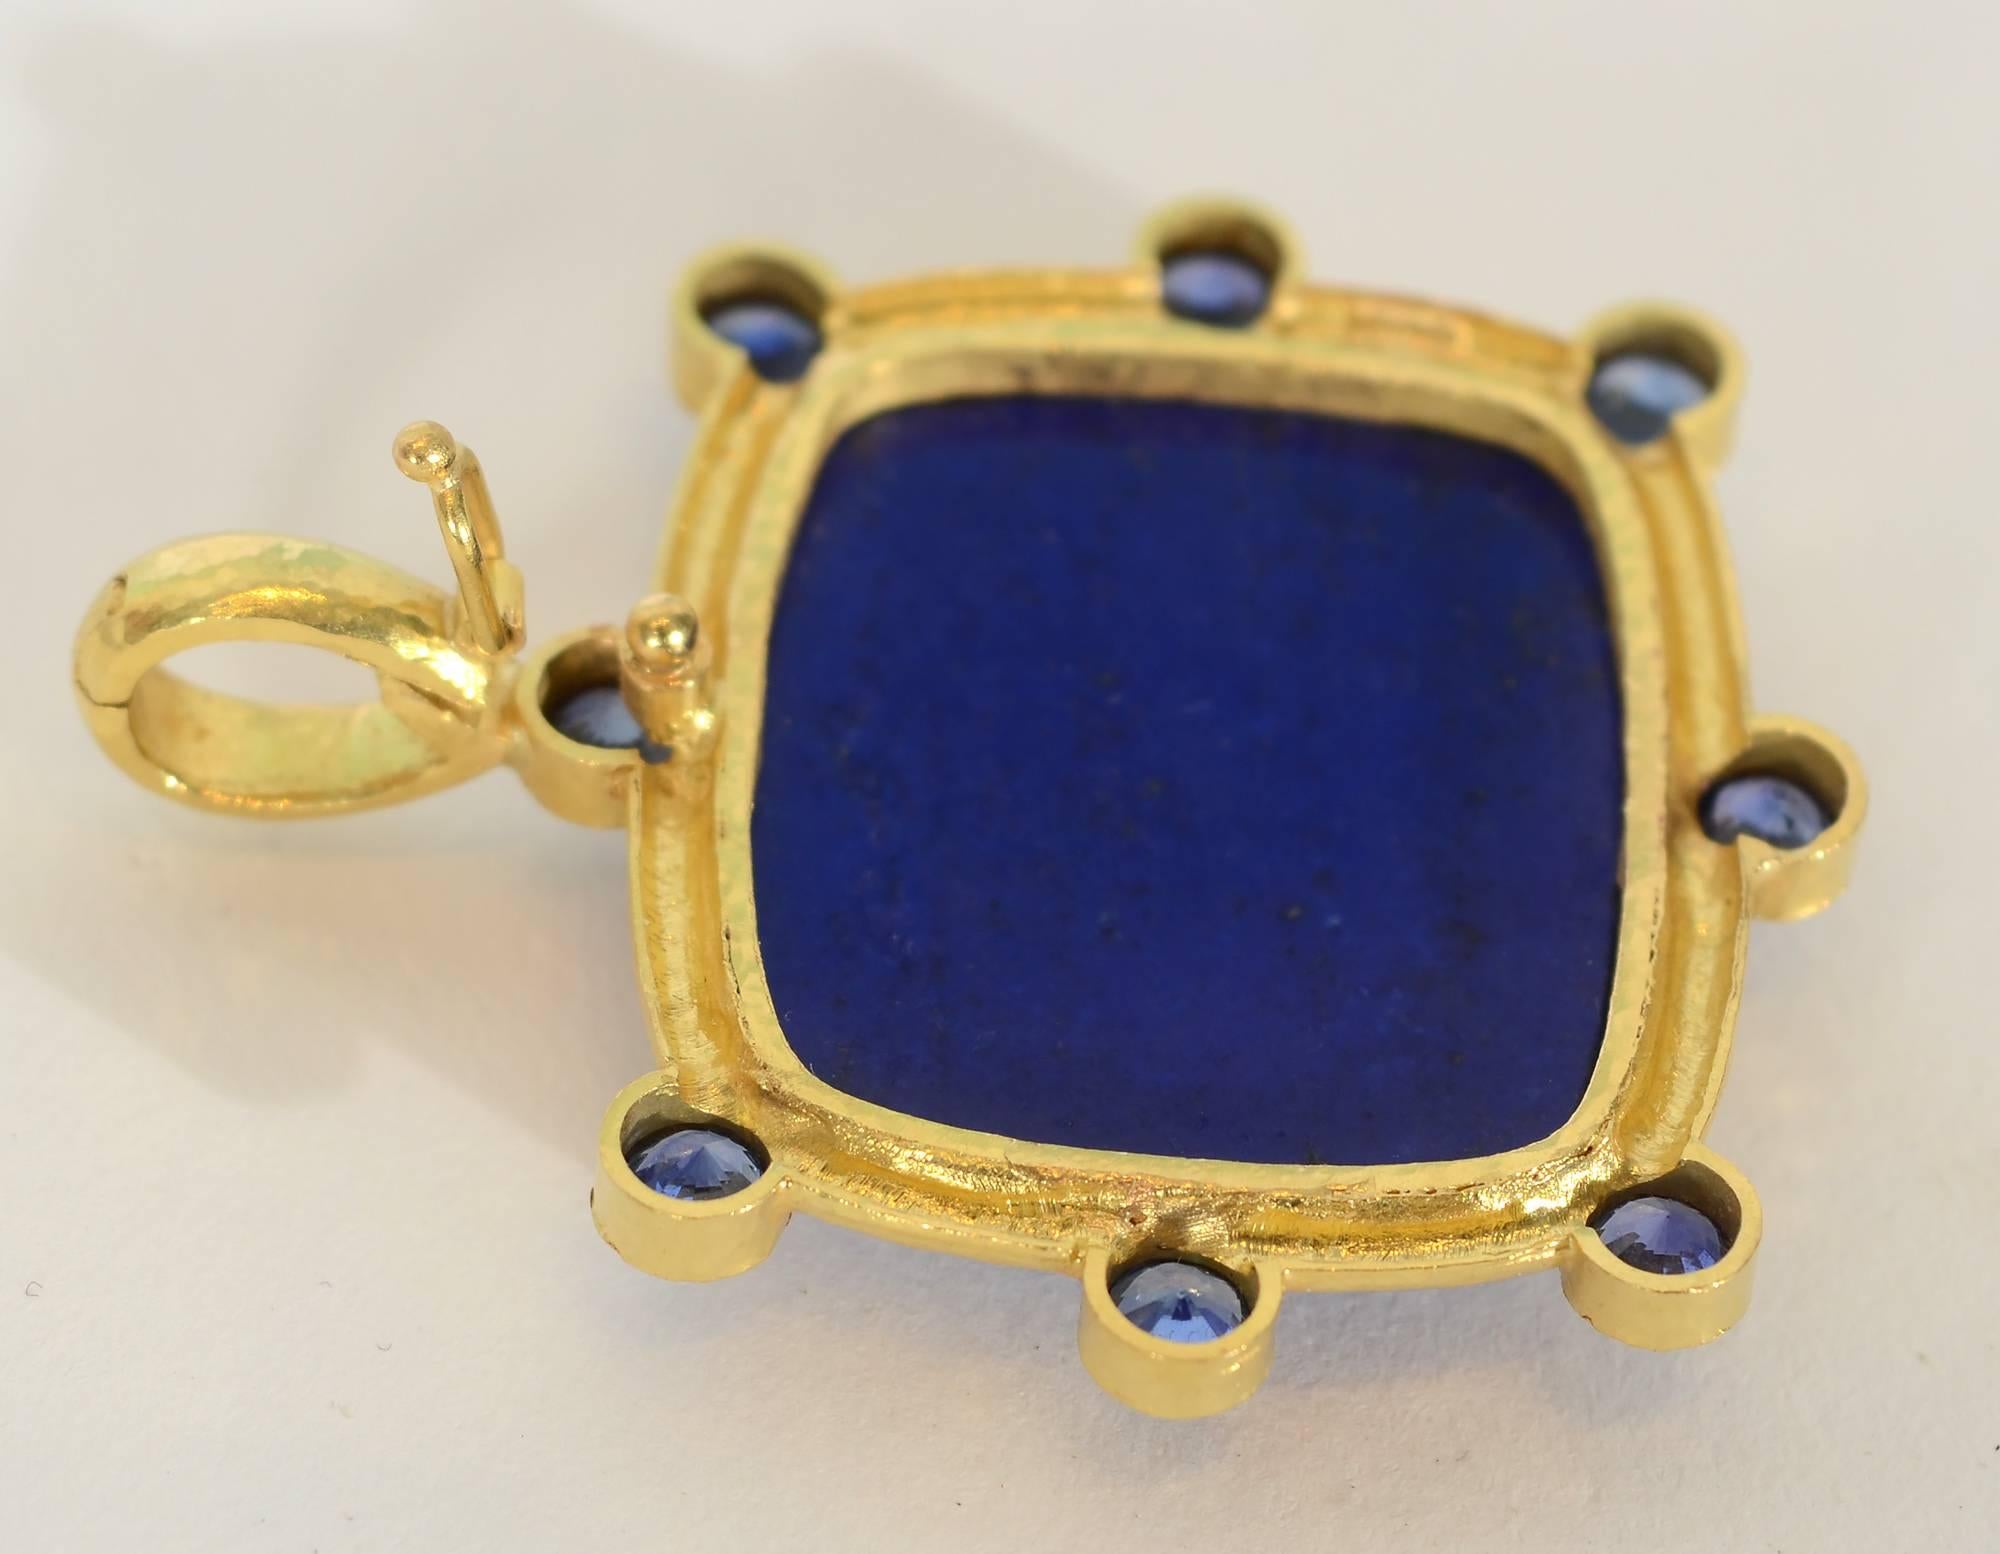 Striking pendant by Elizabeth Locke with an intensely colored central lapis lazuli. Surrounding the rectangular stone are eight fine sapphires. The frame around the stones is done in Locke's signature hammered gold finish. The piece is 1 9/16"